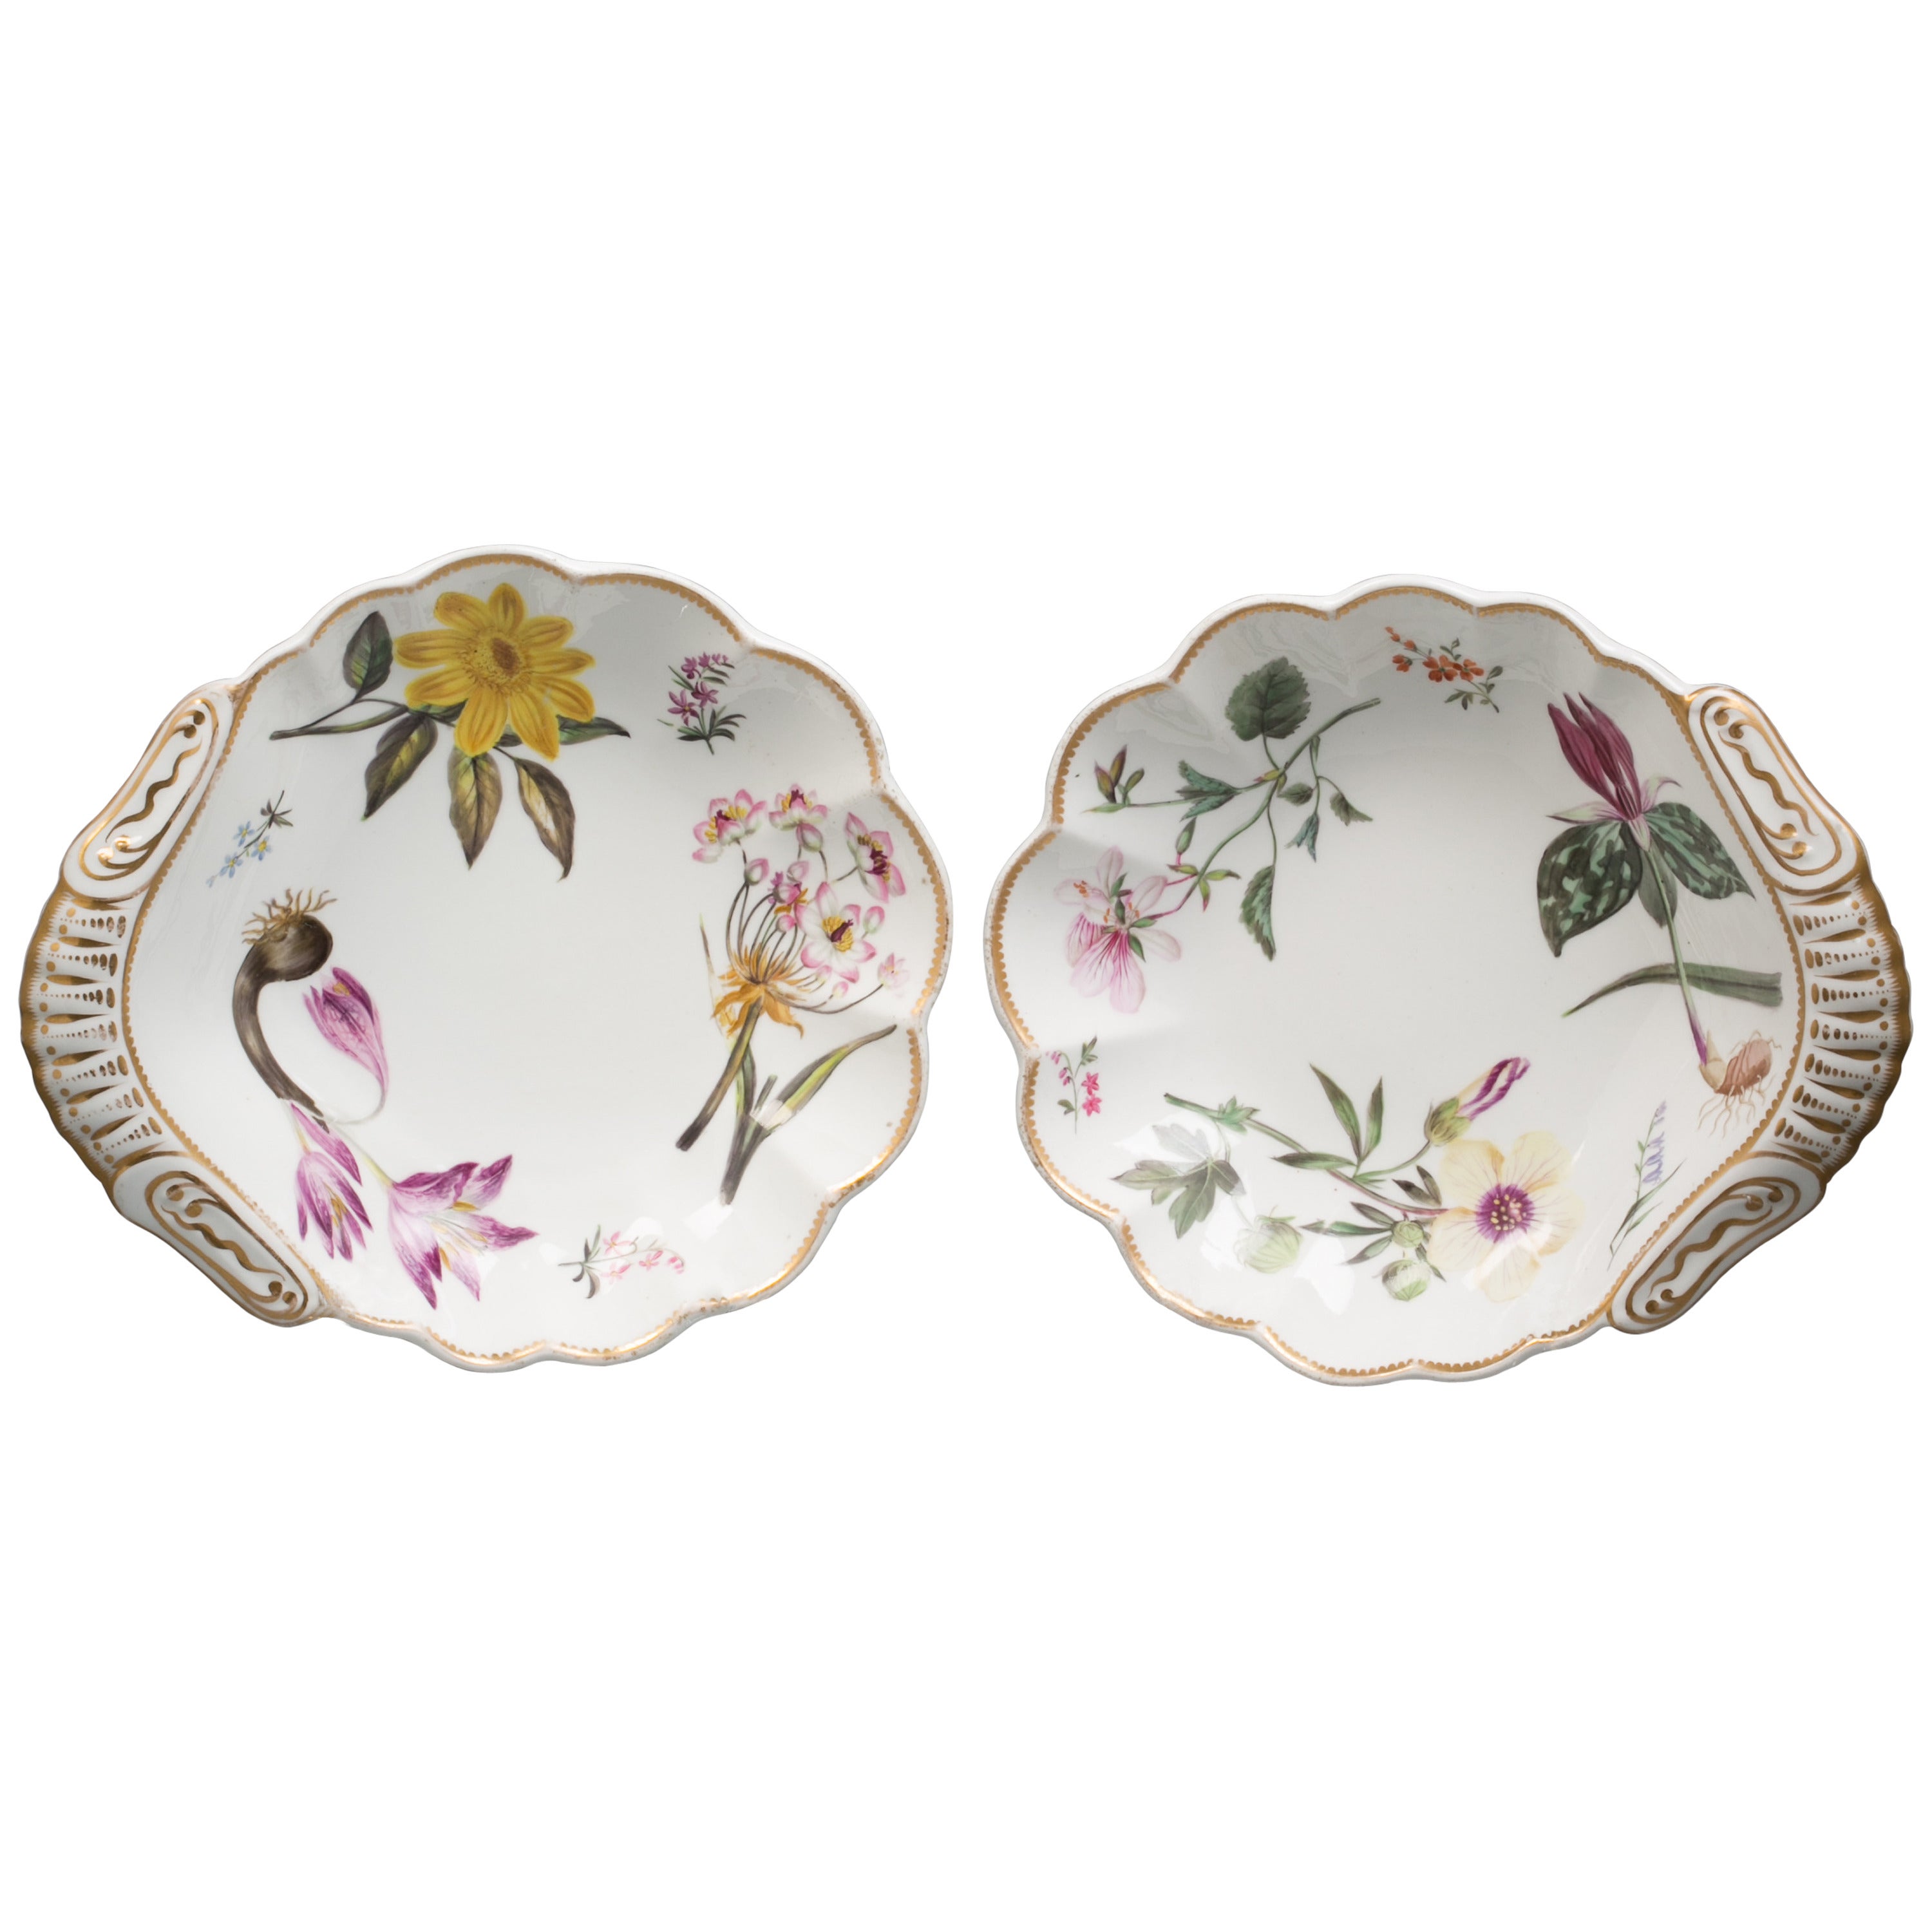 Pair of English Spode Porcelain Botanical Shell-Shape Dishes, circa 1820 For Sale